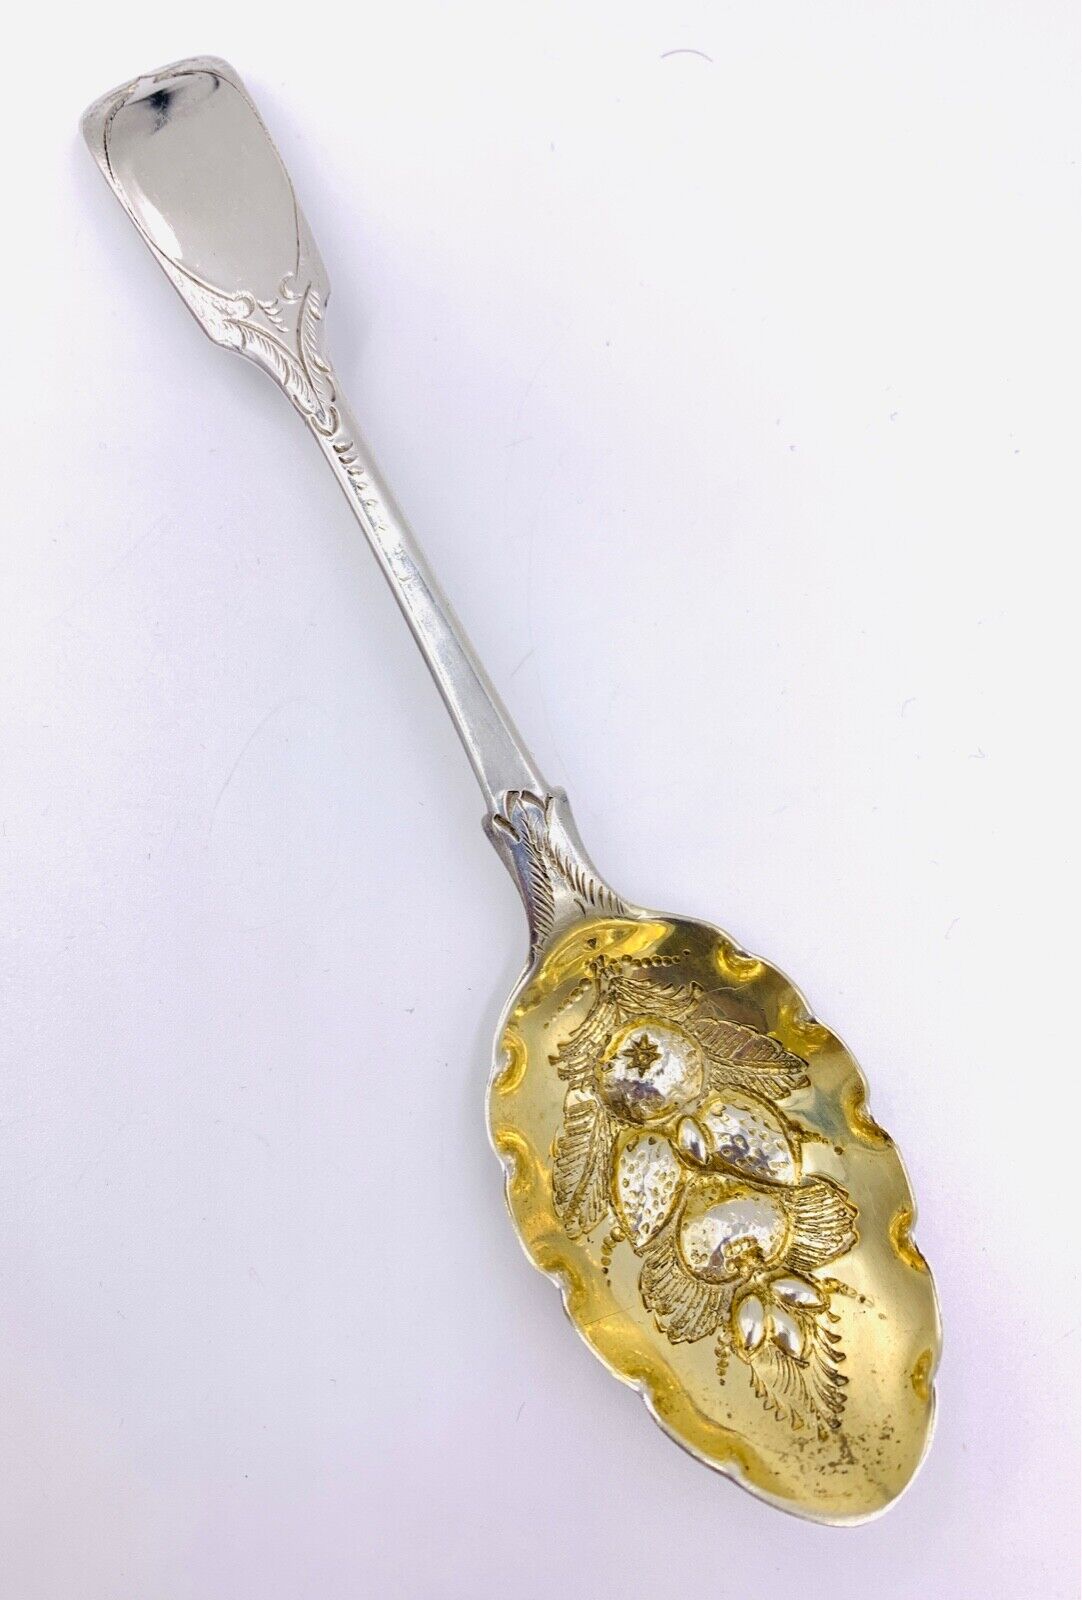 1866 Antique London Samuel Strahan Sterling Silver Berry Serving Spoon